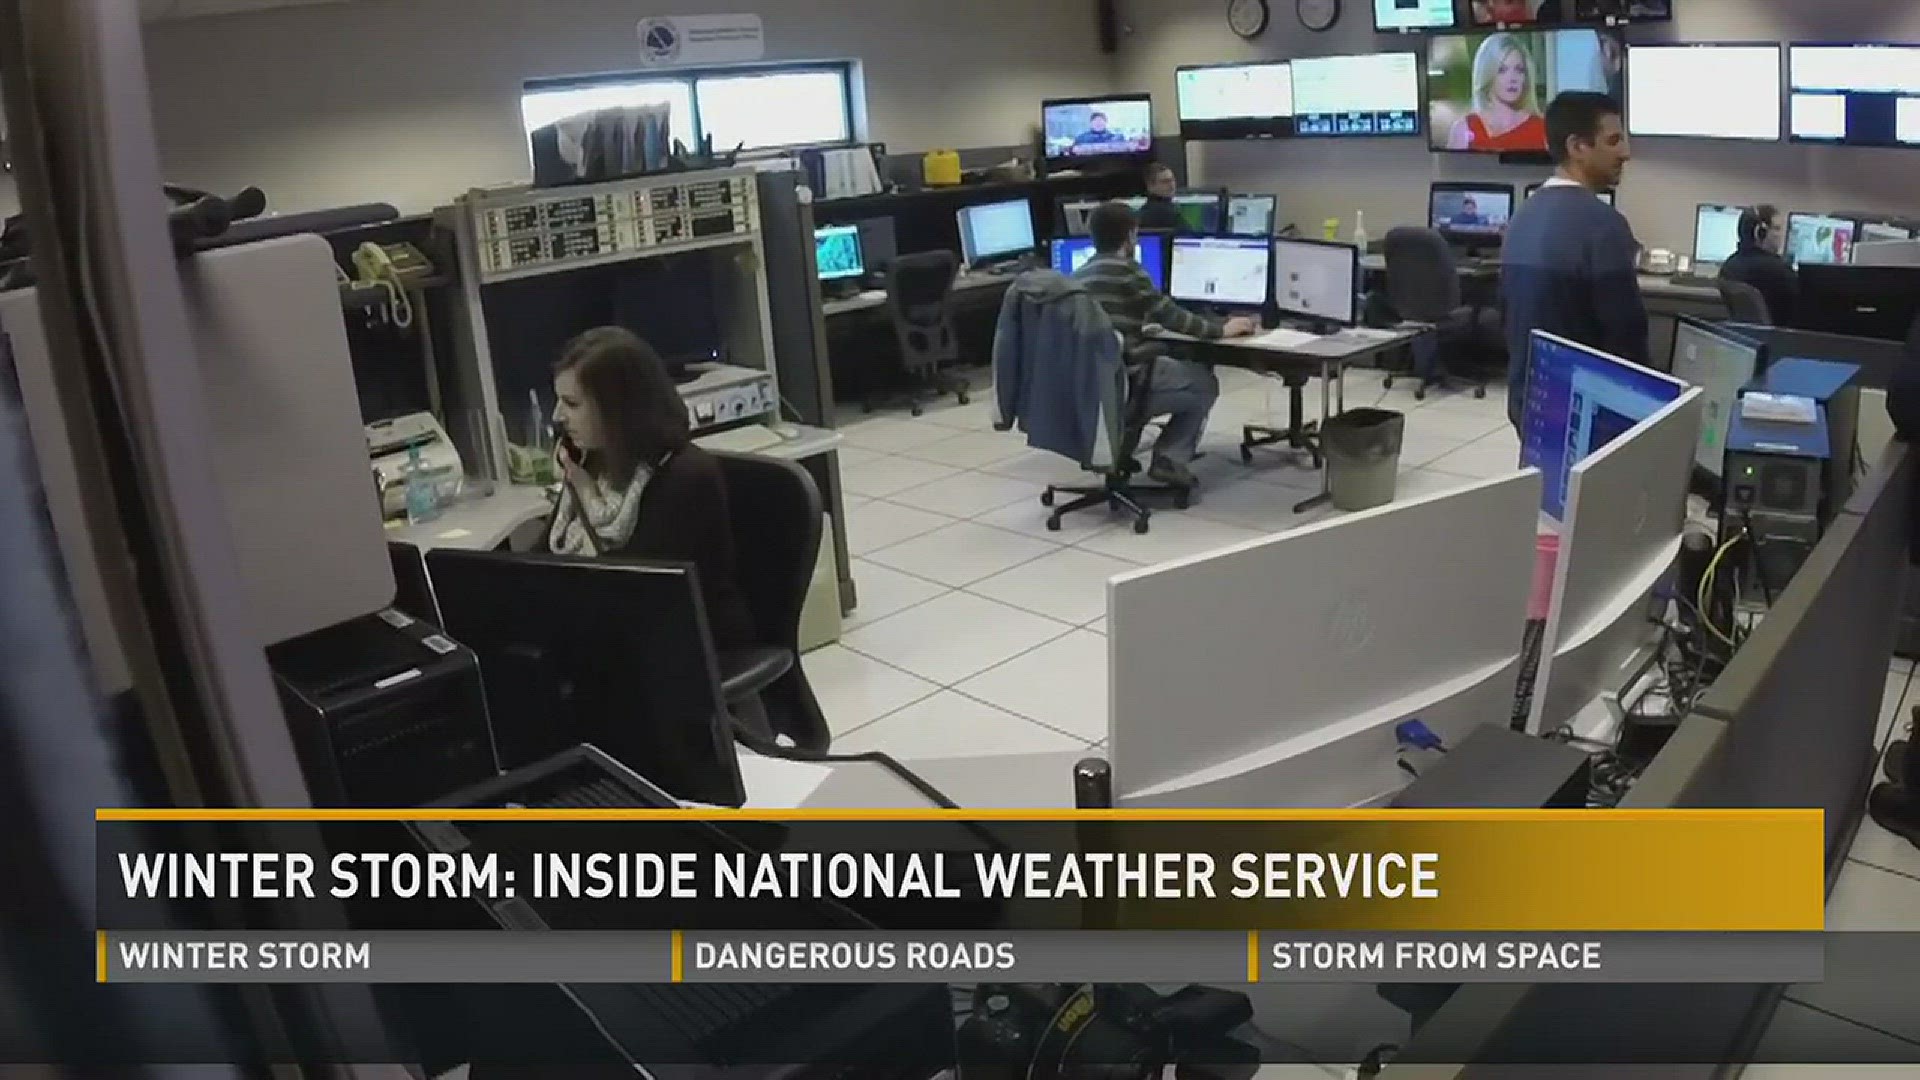 As emotions varied about the snow in Morristown, the National Weather Service kept an eye on the storm. (1/22/16 10PM)